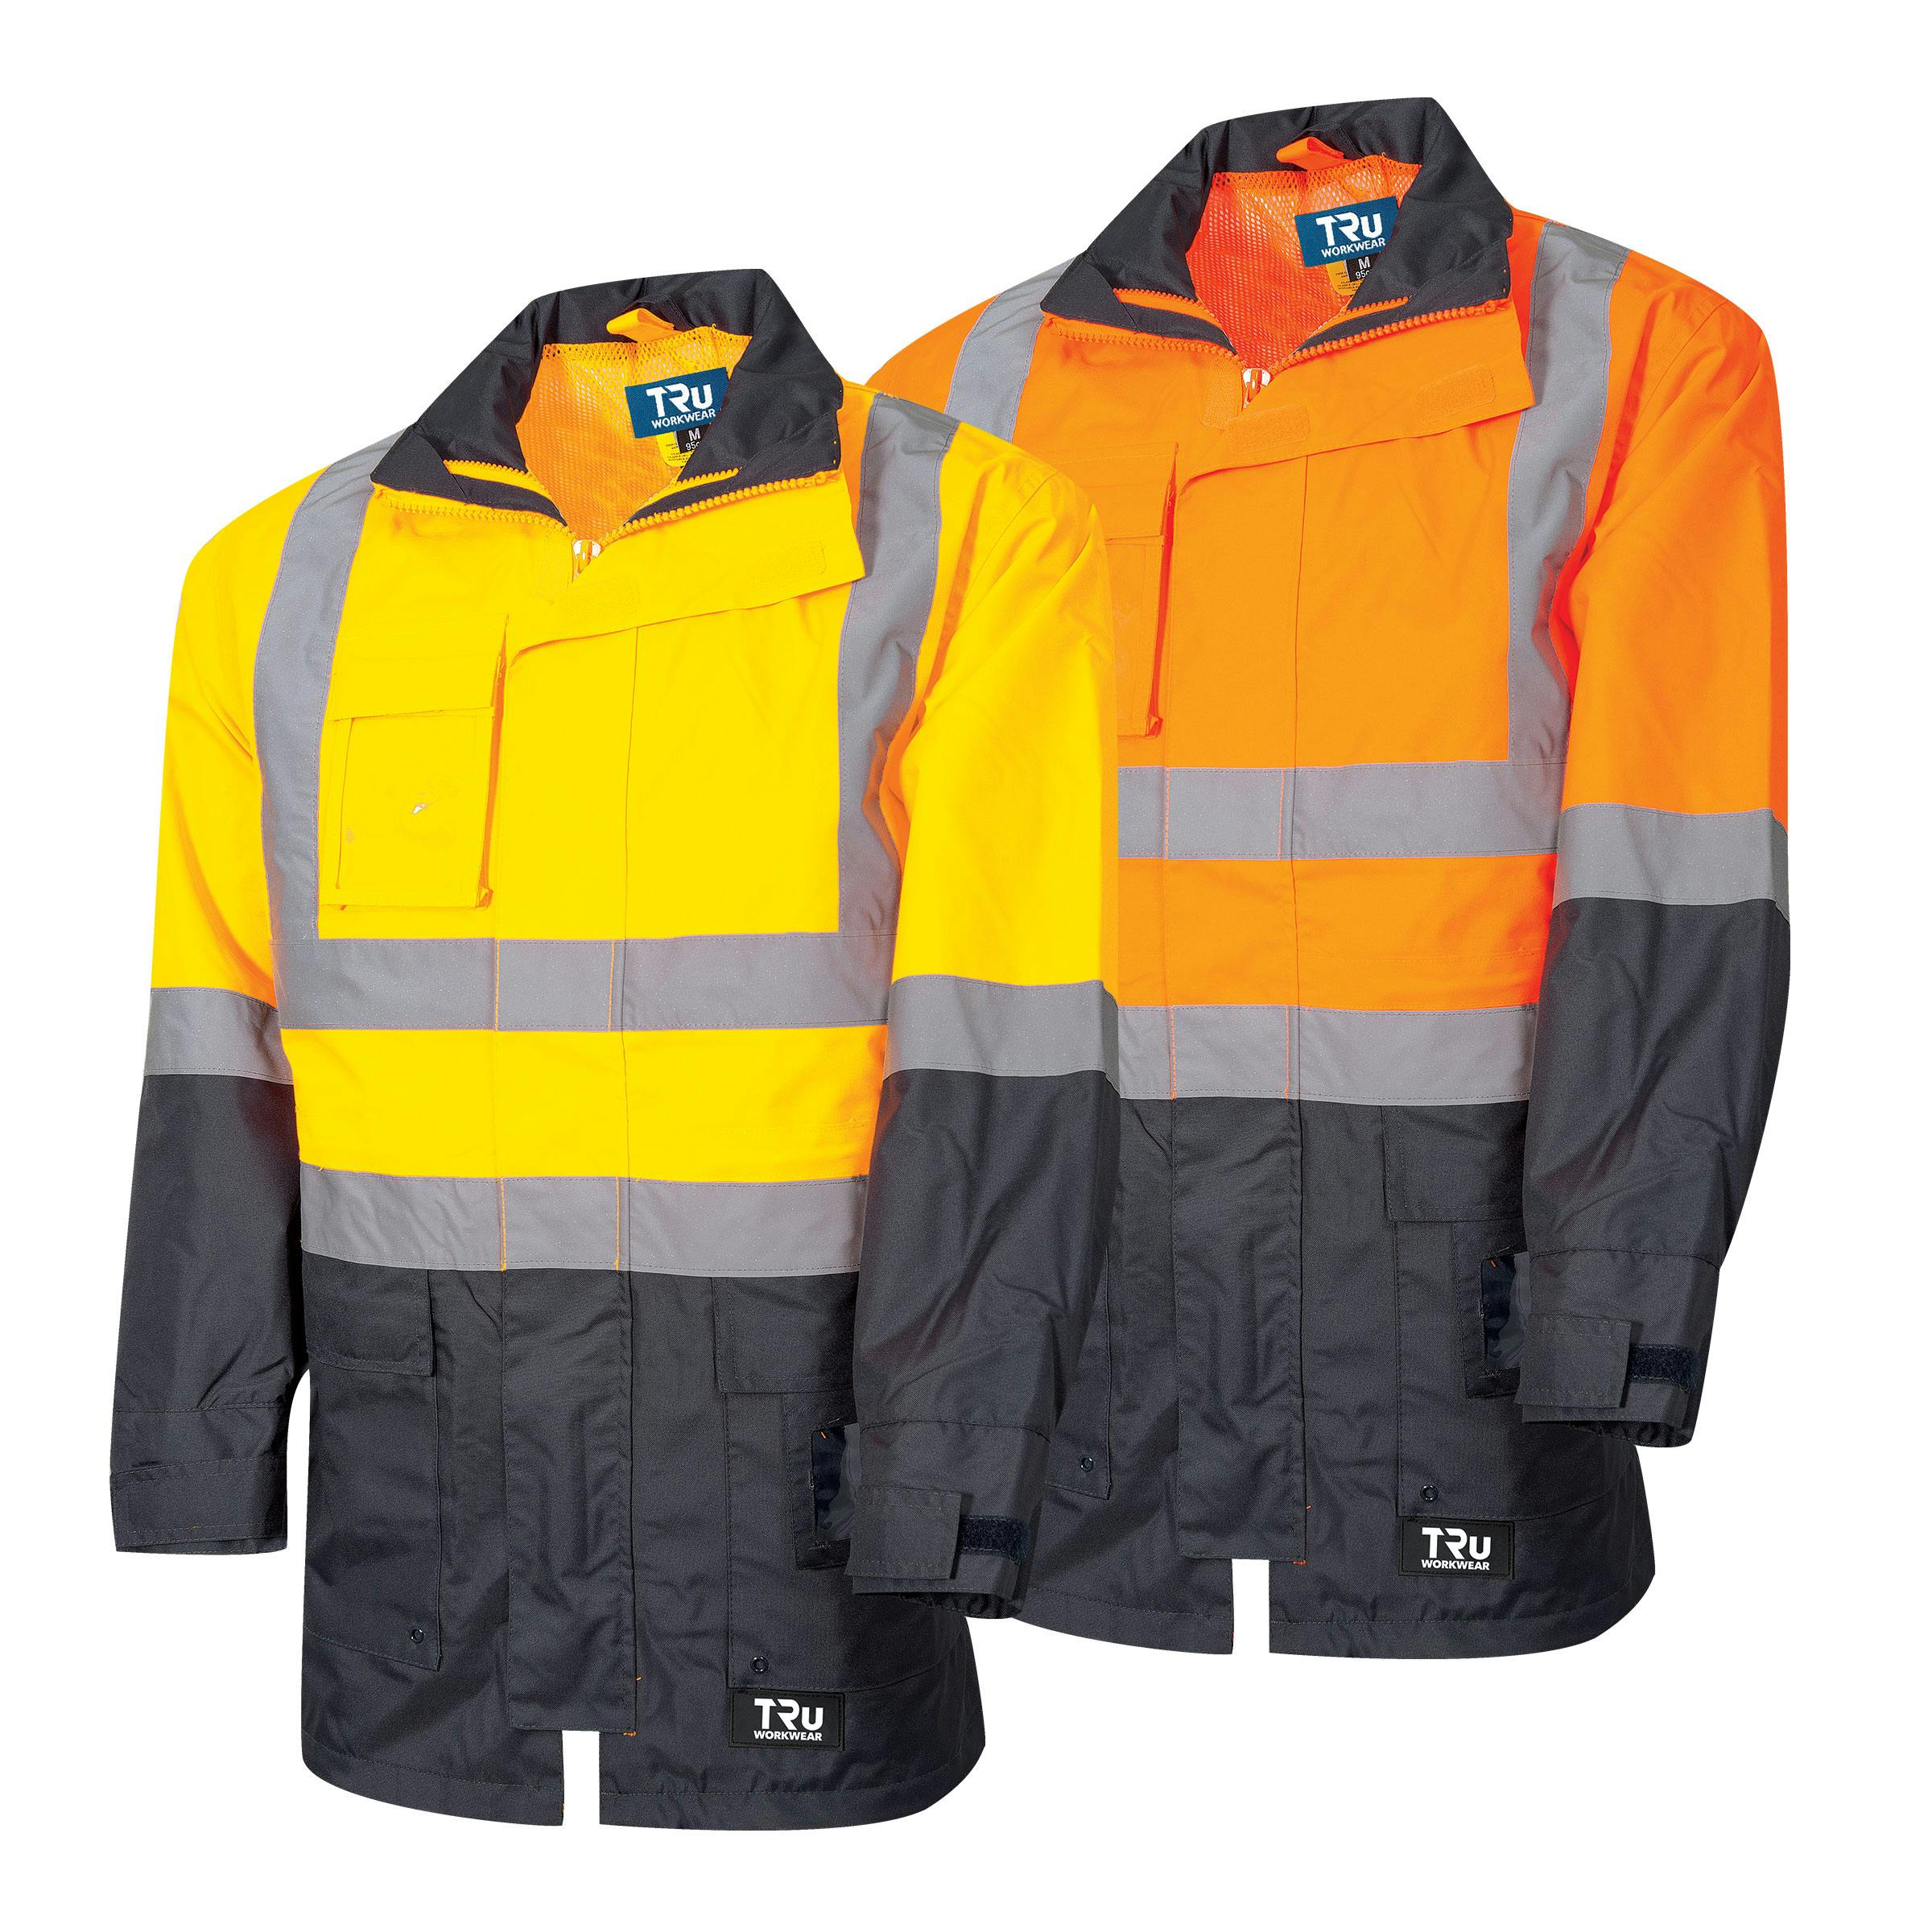 TRu Workwear Jacket Polyester Oxford With Tru Reflective Tape (Suits 4 In 1 Insert)